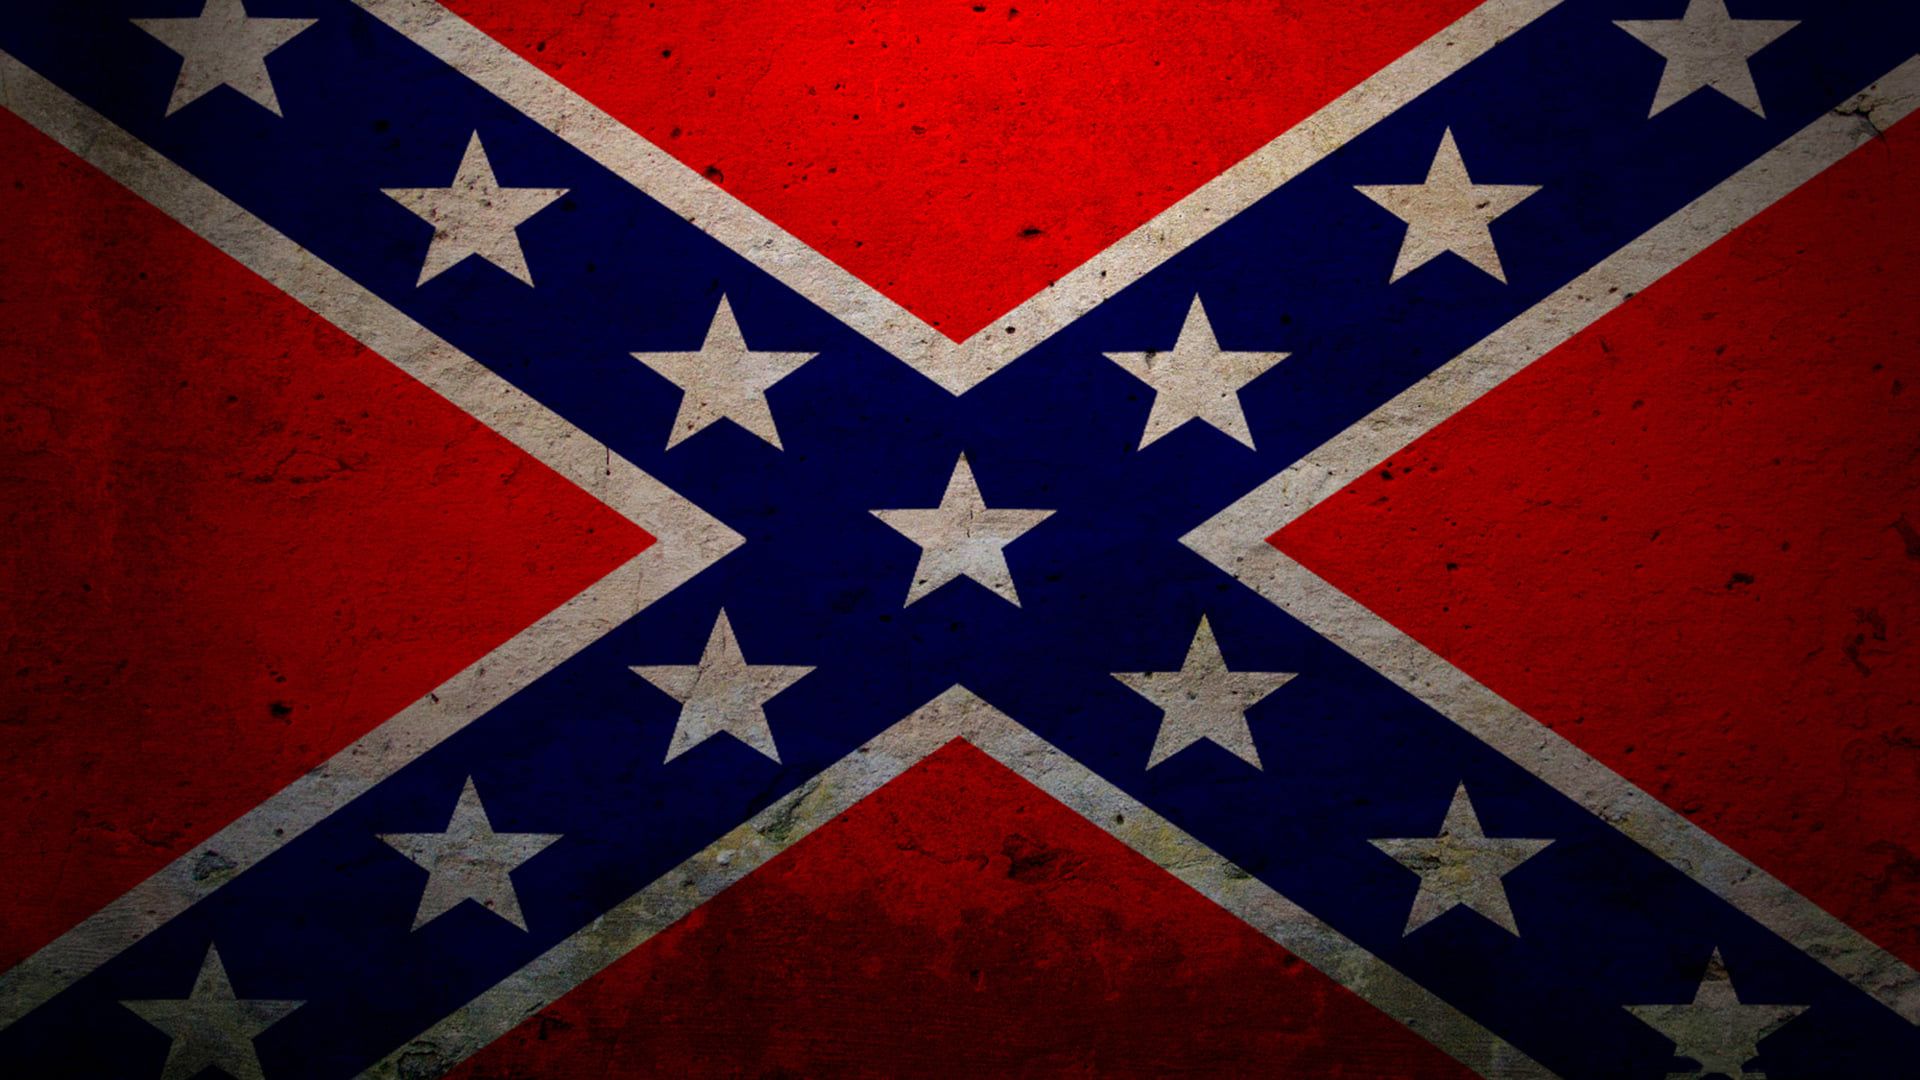 C.S.A.: The Confederate States of America background